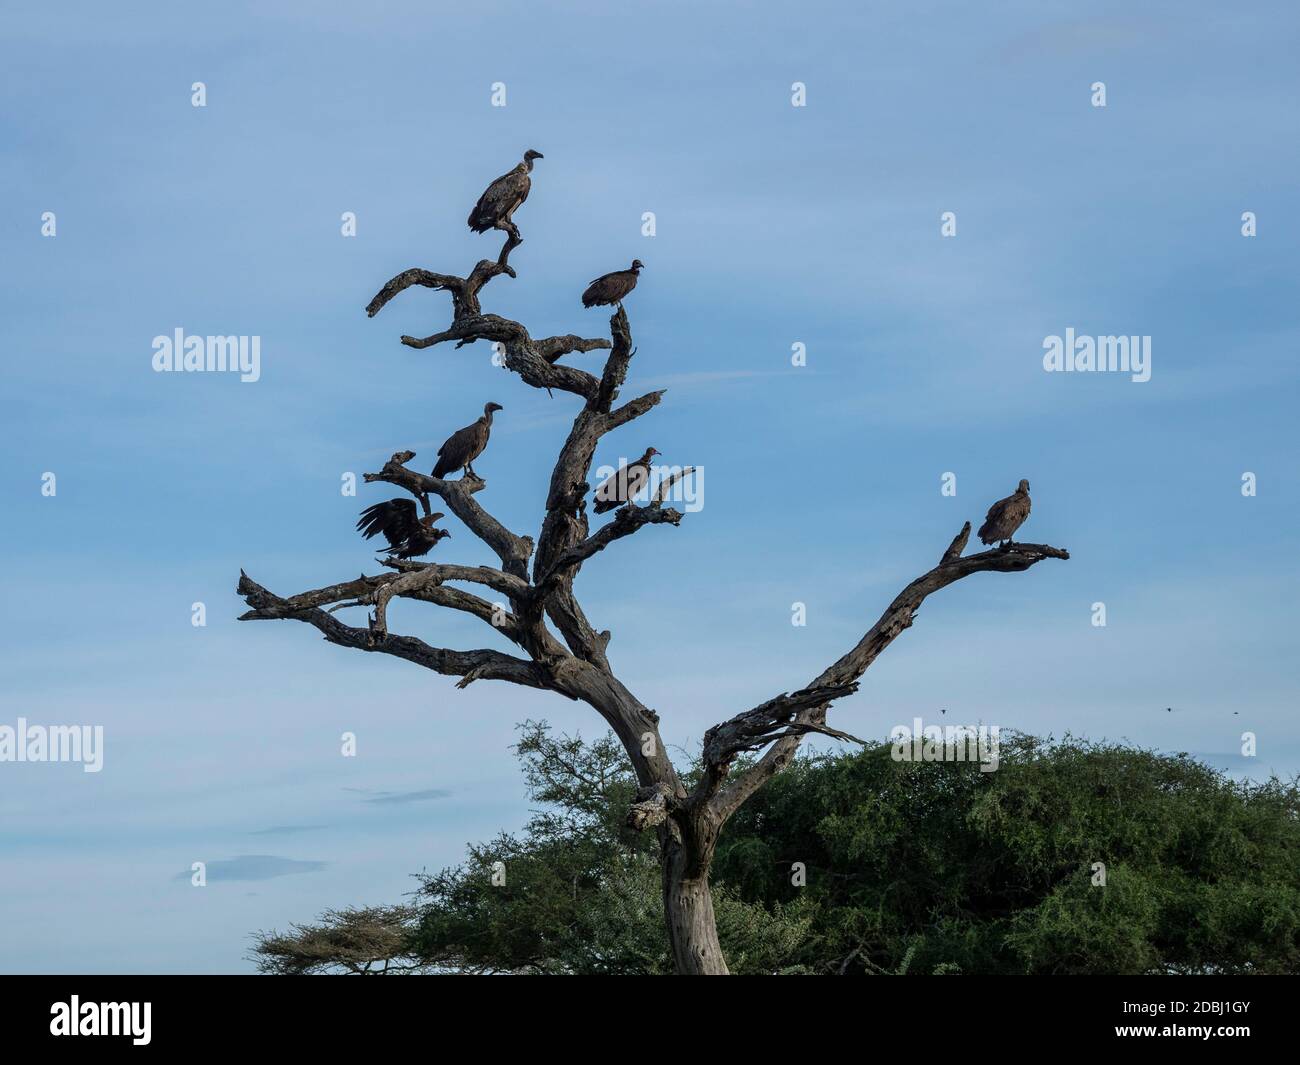 African white-backed vultures (Gyps africanus), Tarangire National Park, Tanzania, East Africa, Africa Stock Photo